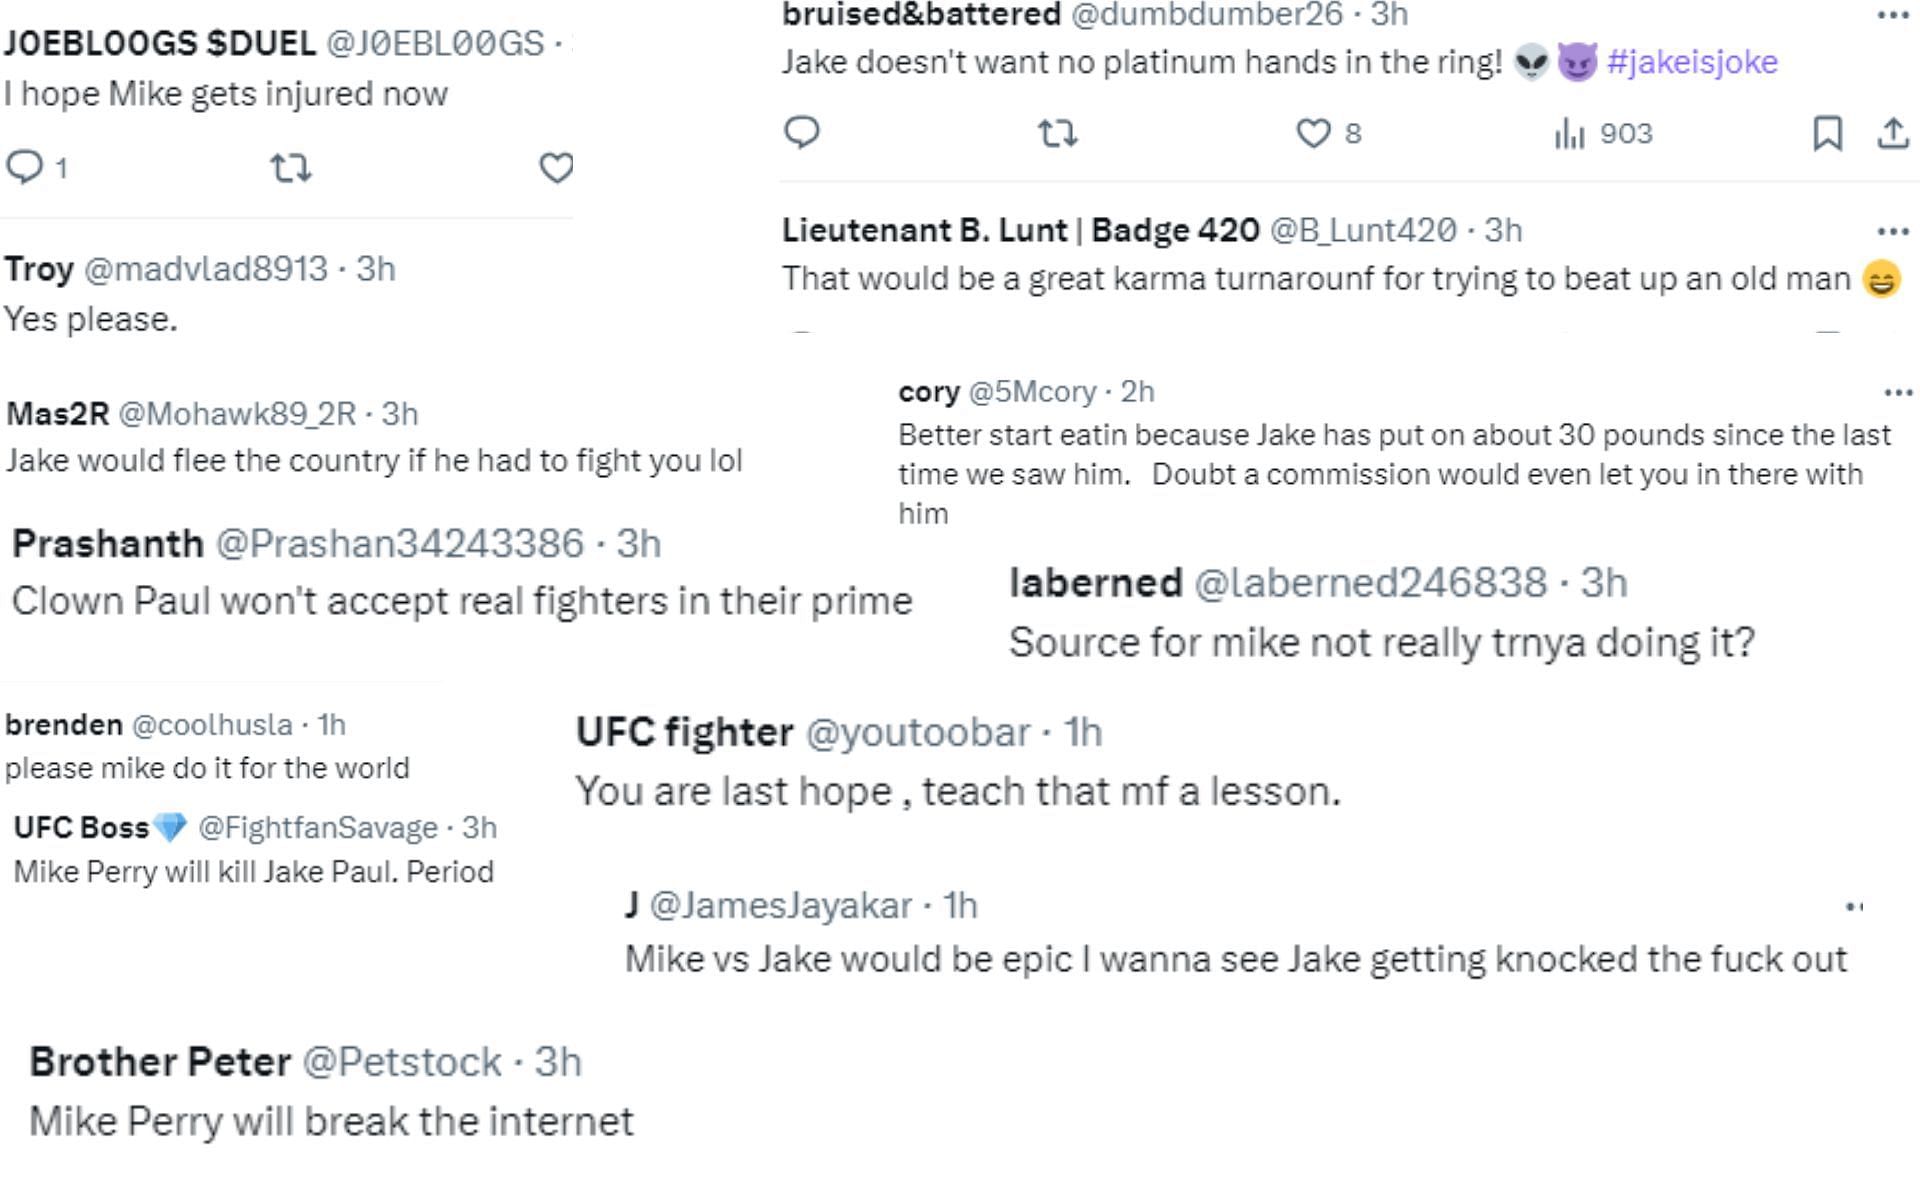 Fan reactions to Perry volunteering to replace Mike Tyson against Jake Paul